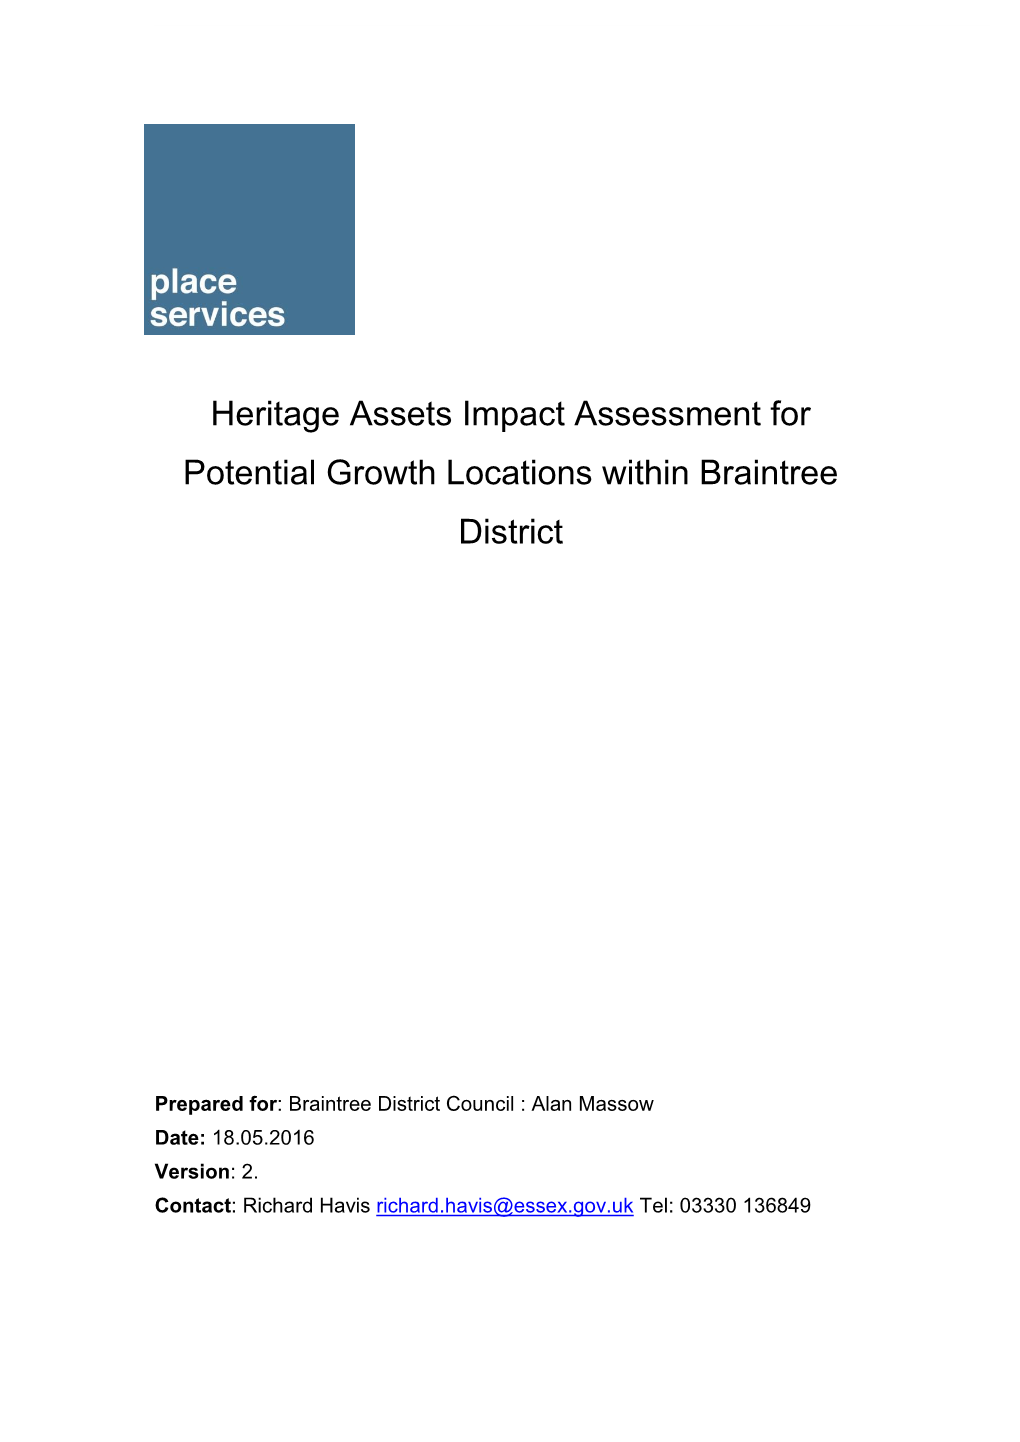 Heritage Assets Impact Assessment for Potential Growth Locations Within Braintree District